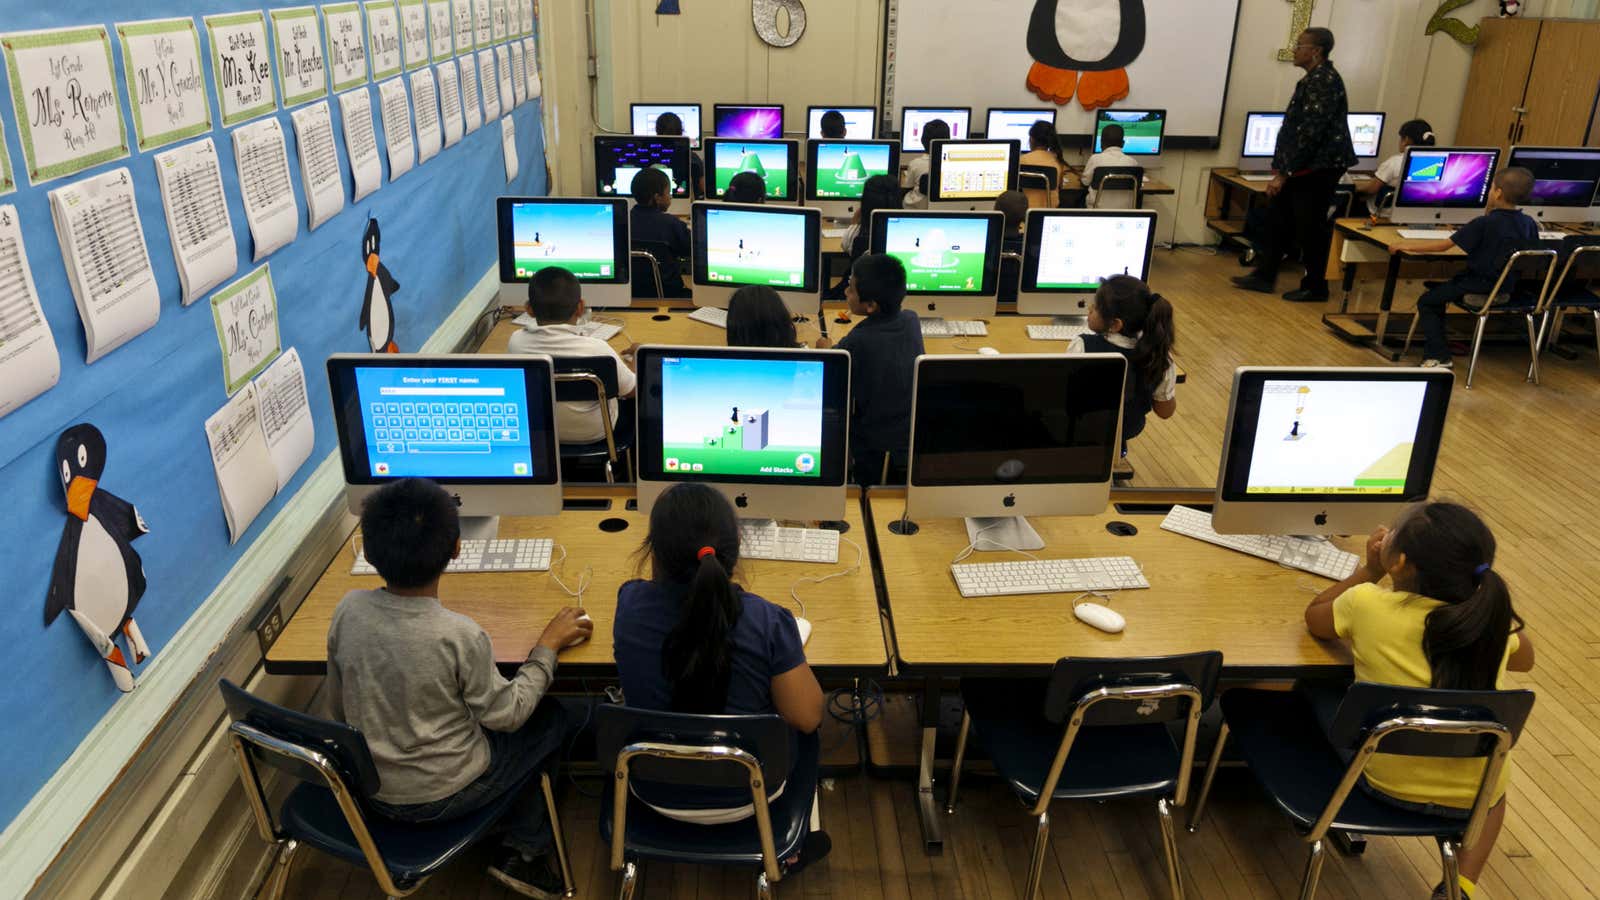 Could a digital classroom save US education?